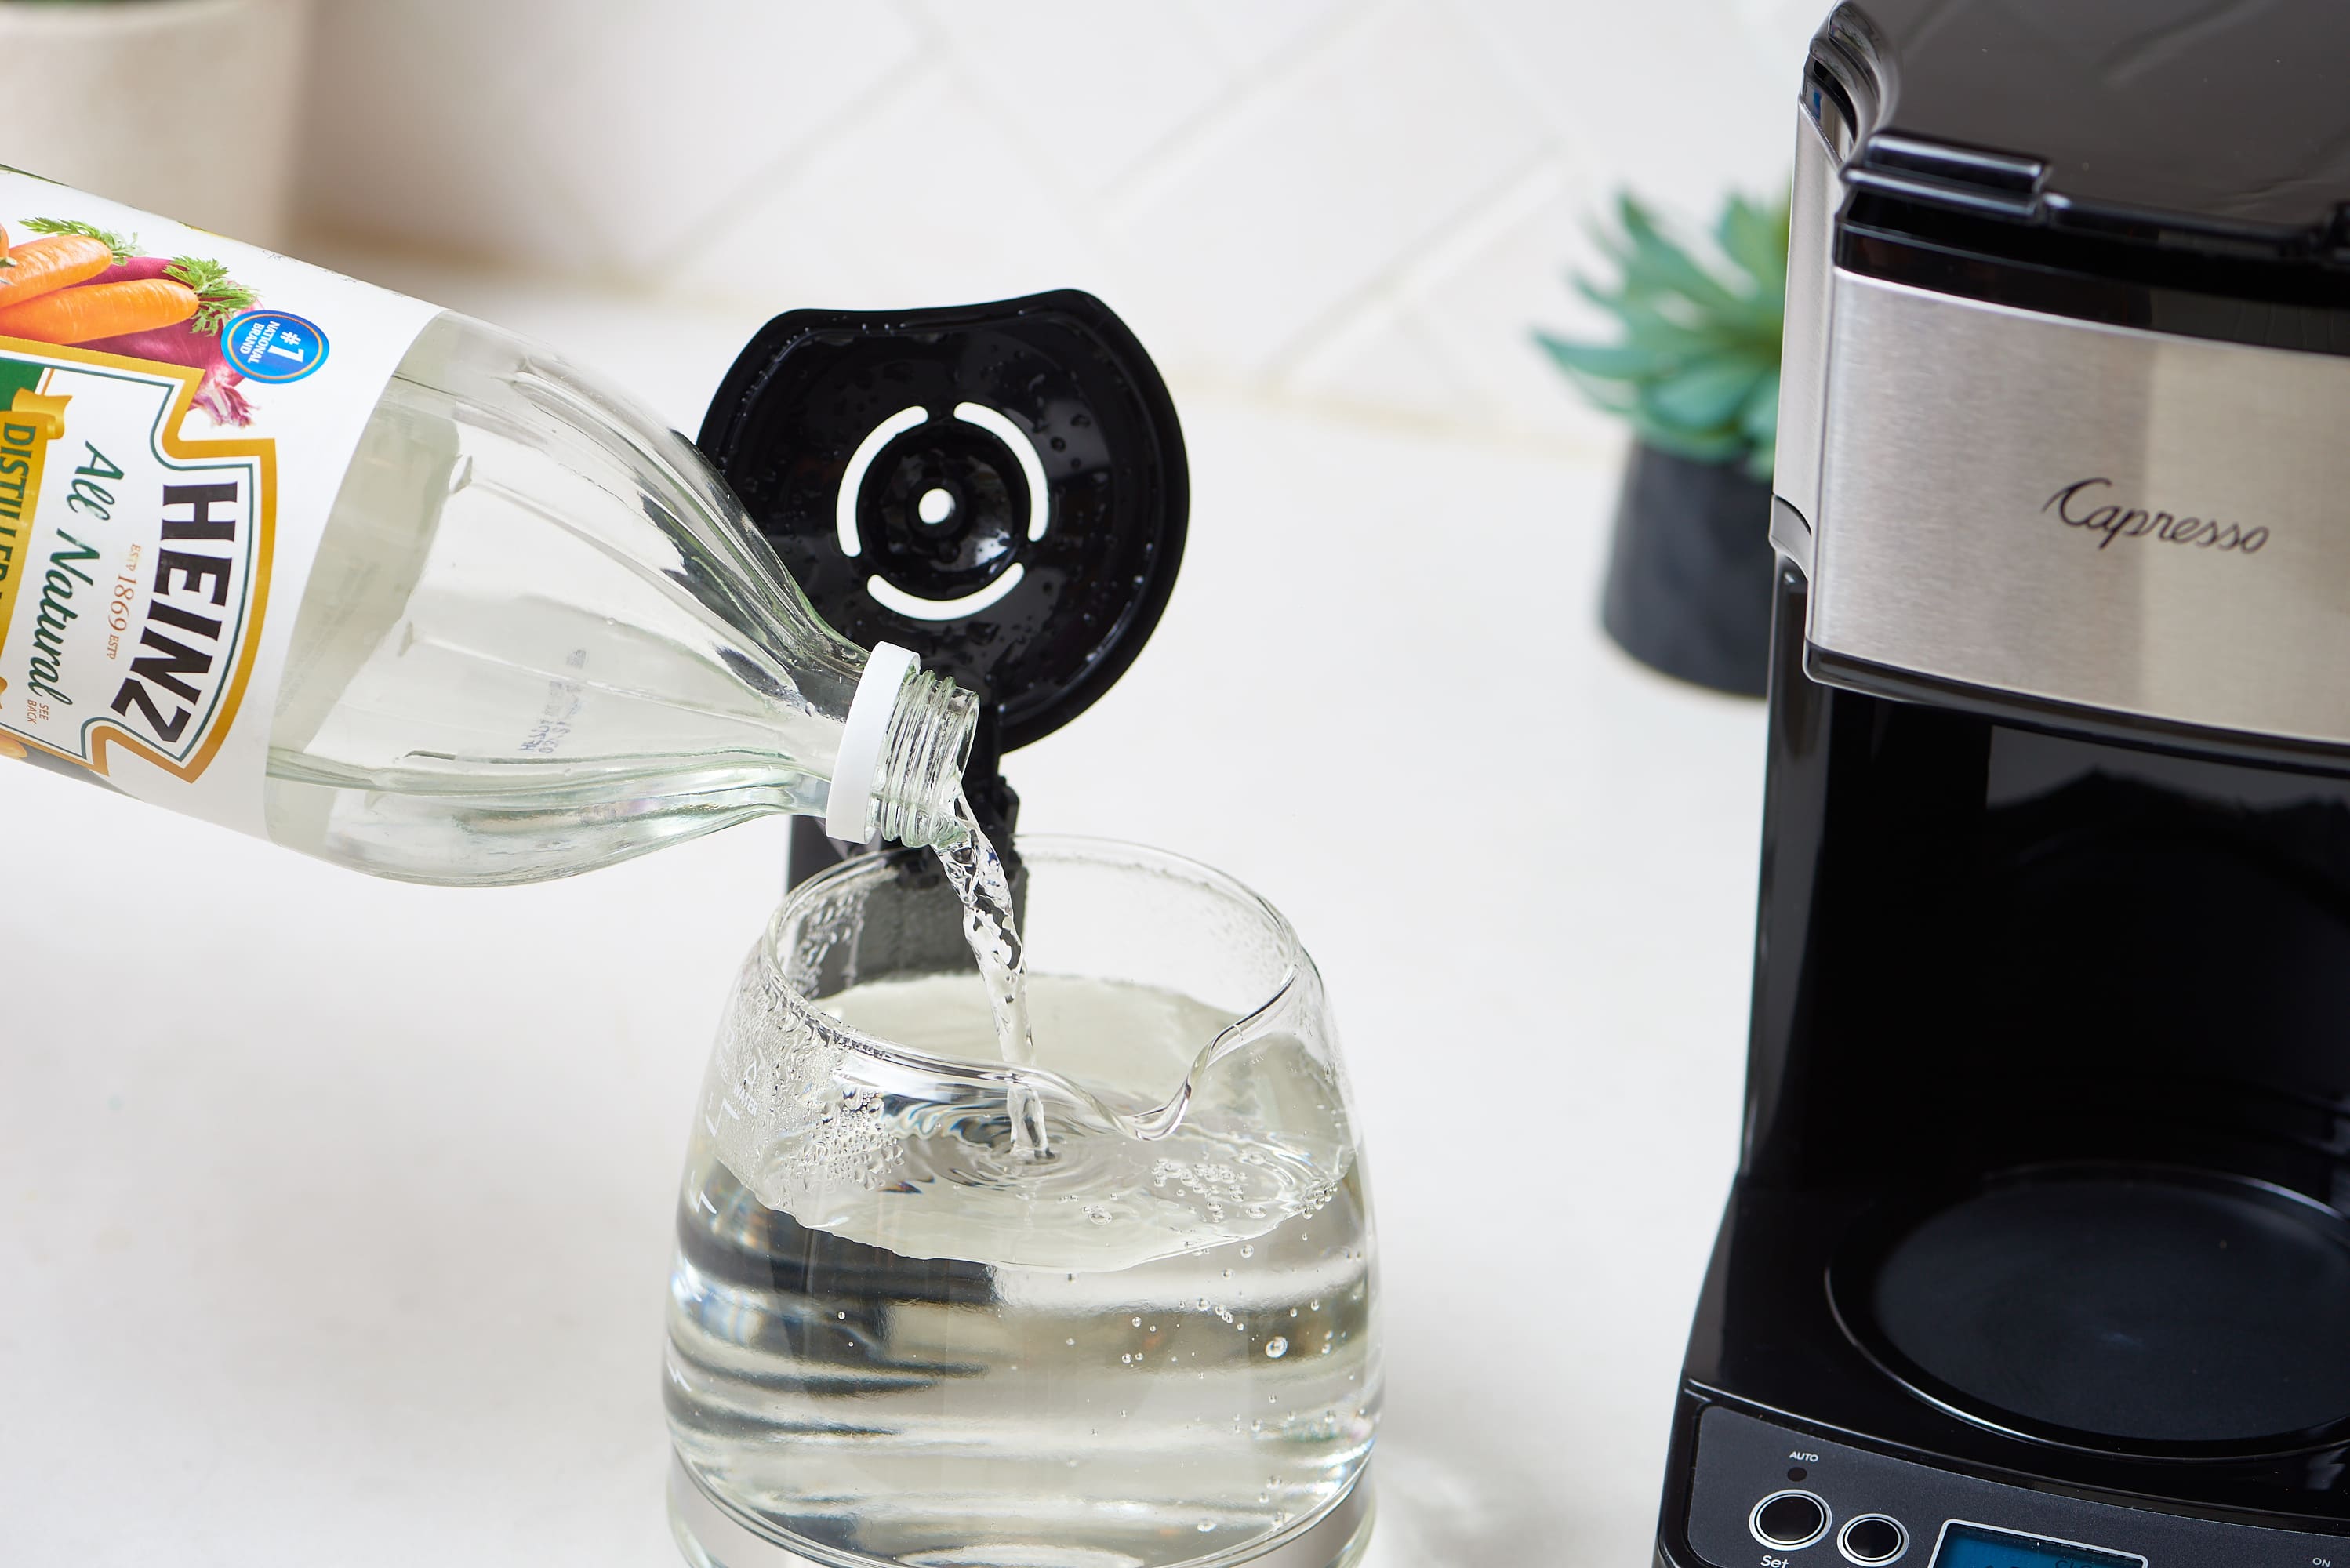 How To Descale a Coffee Maker | Kitchn